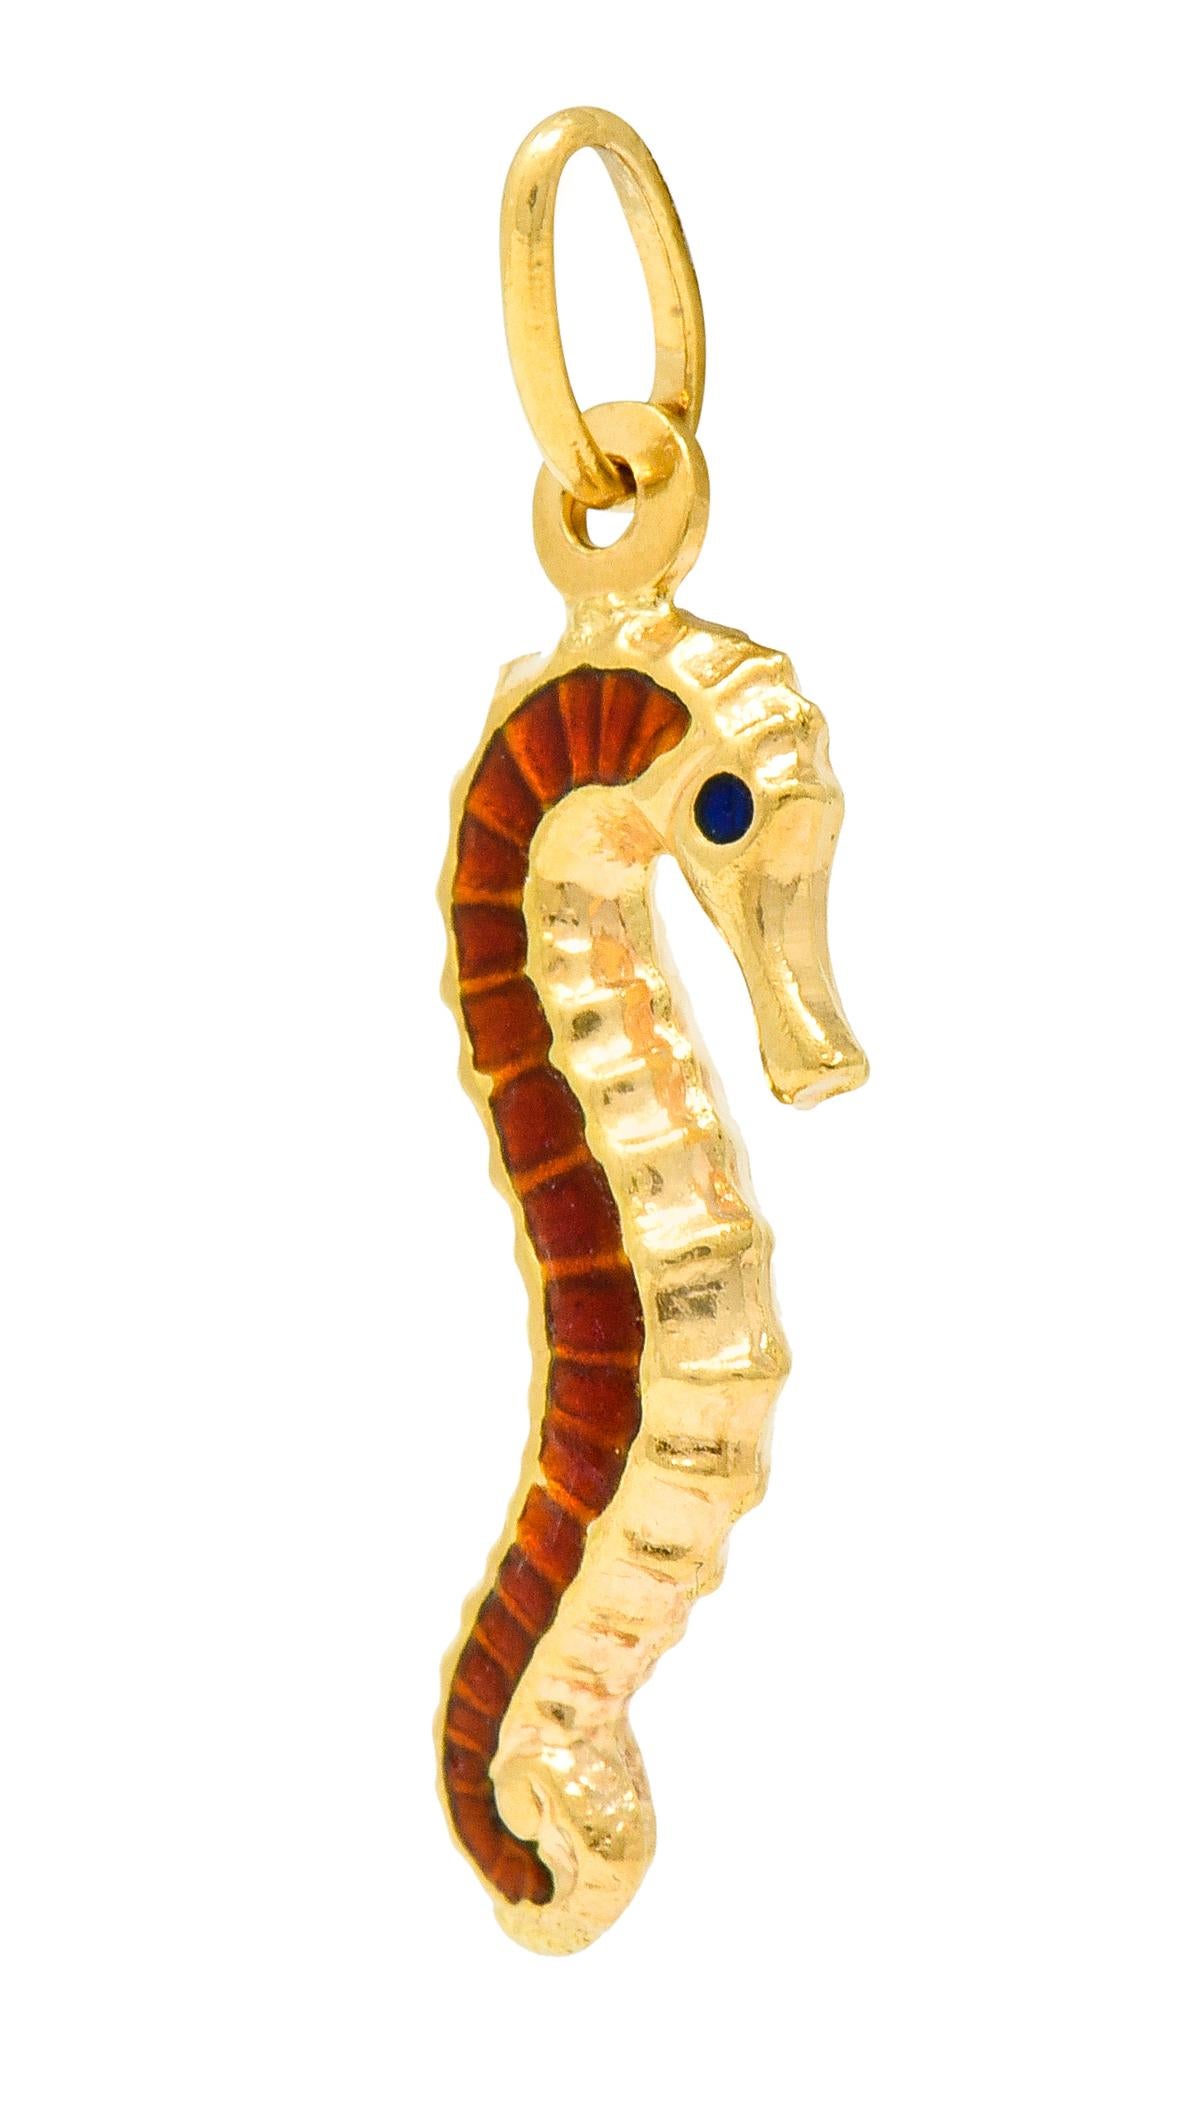 Charm is rendered as a three dimensional puffed seahorse with mirrored details on both sides

Deeply ridged  glossed with reddish-orange enamel scales

Eyes are bright blue enamel accents

Fully signed Fabor with assay marks for Arezzo